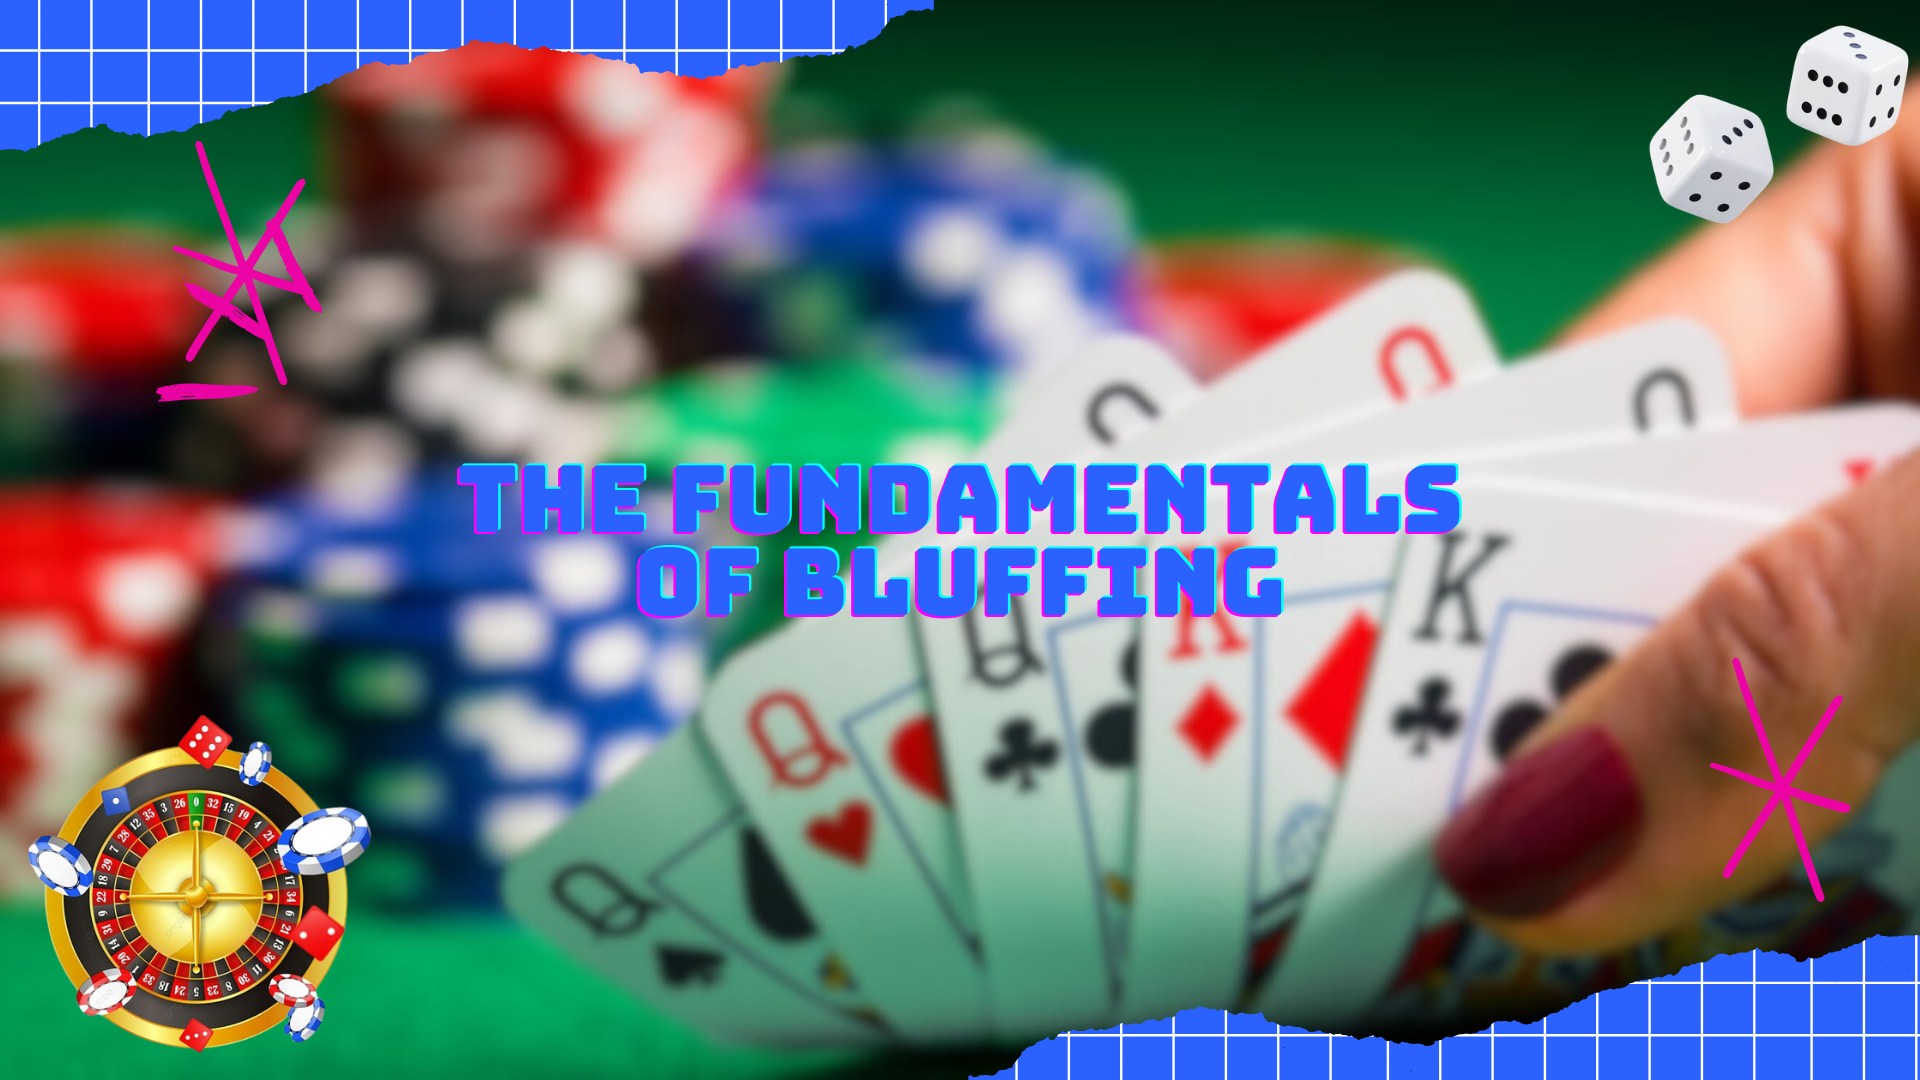 The Fundamentals of Bluffing